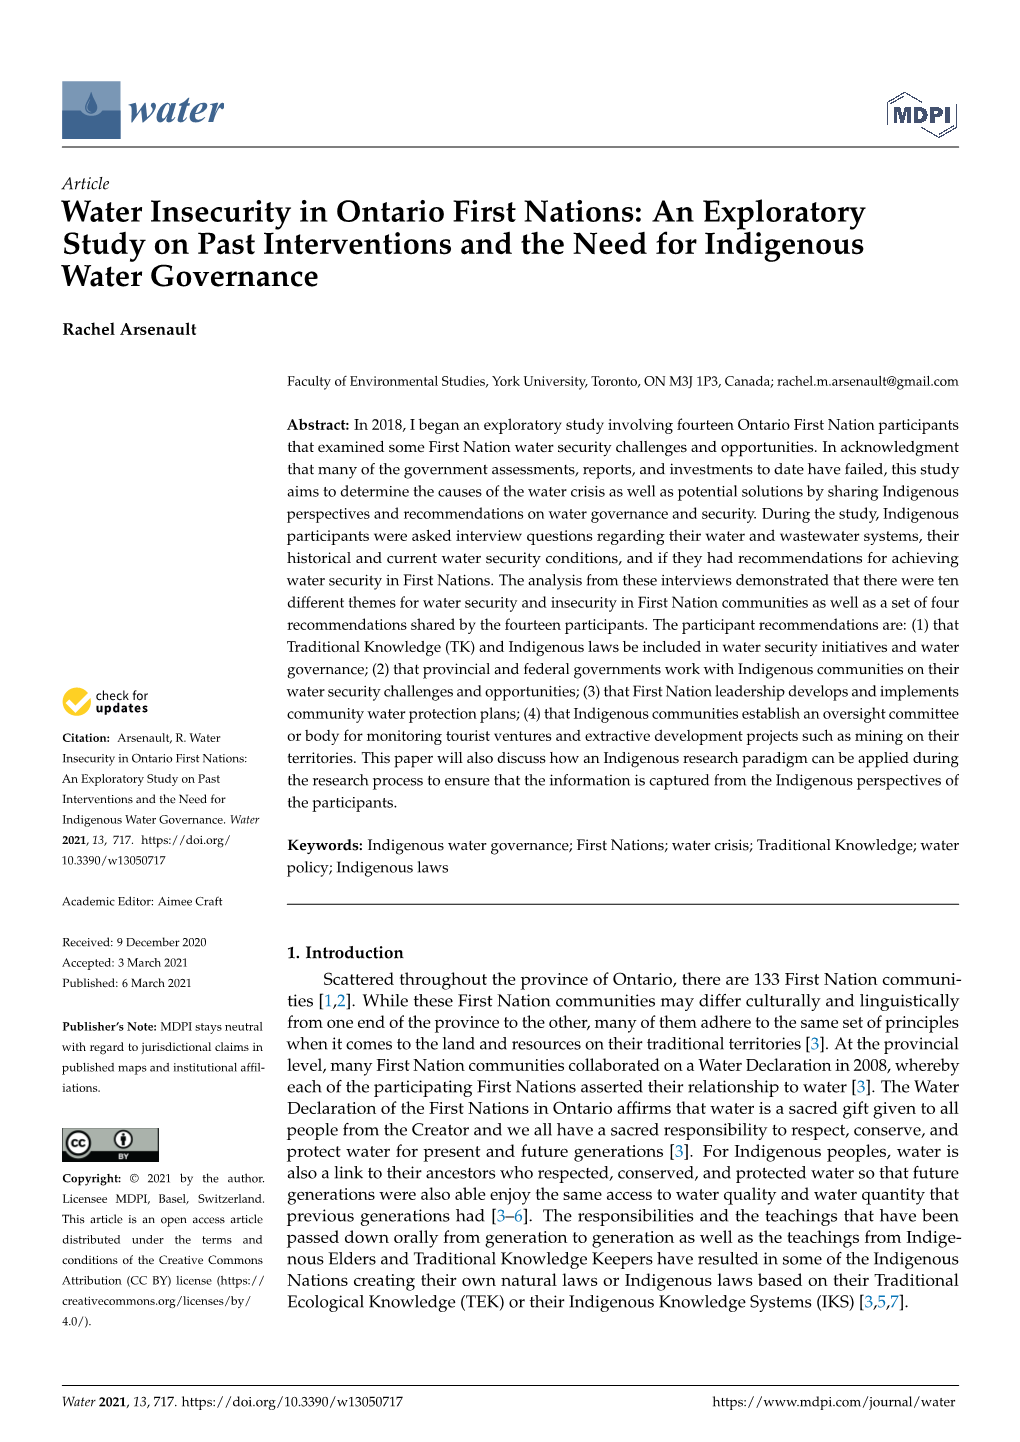 Water Insecurity in Ontario First Nations: an Exploratory Study on Past Interventions and the Need for Indigenous Water Governance